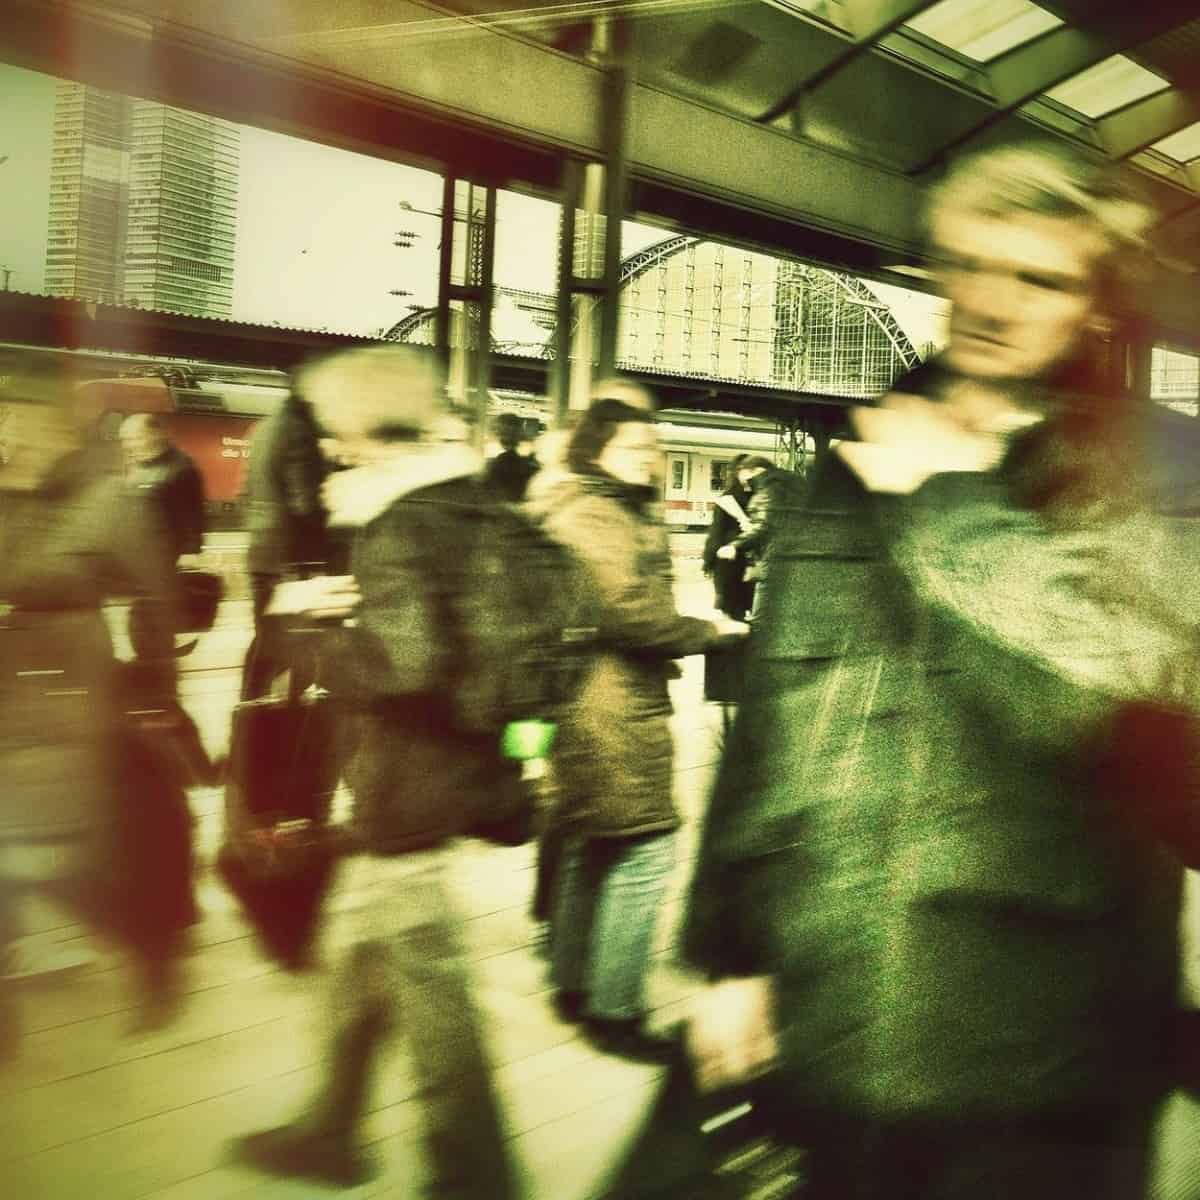 Blurred image of people moving around.